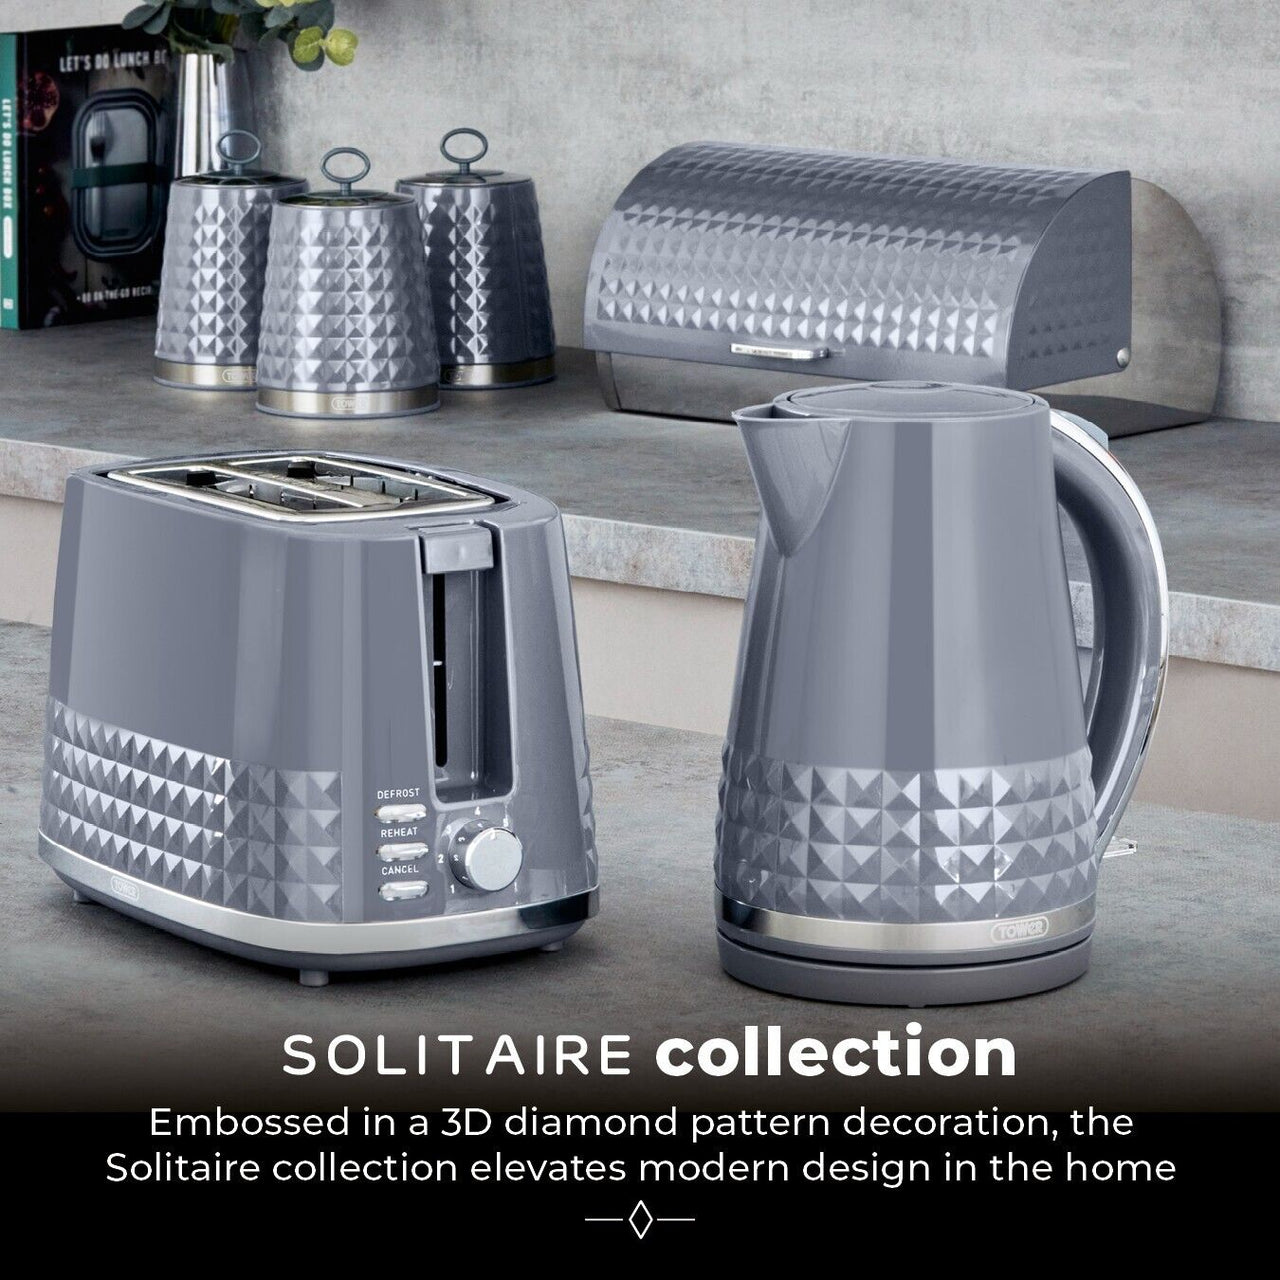 Tower Solitaire Kettle 2 Slice Toaster Bread Bin & Canisters Set Grey & Chrome